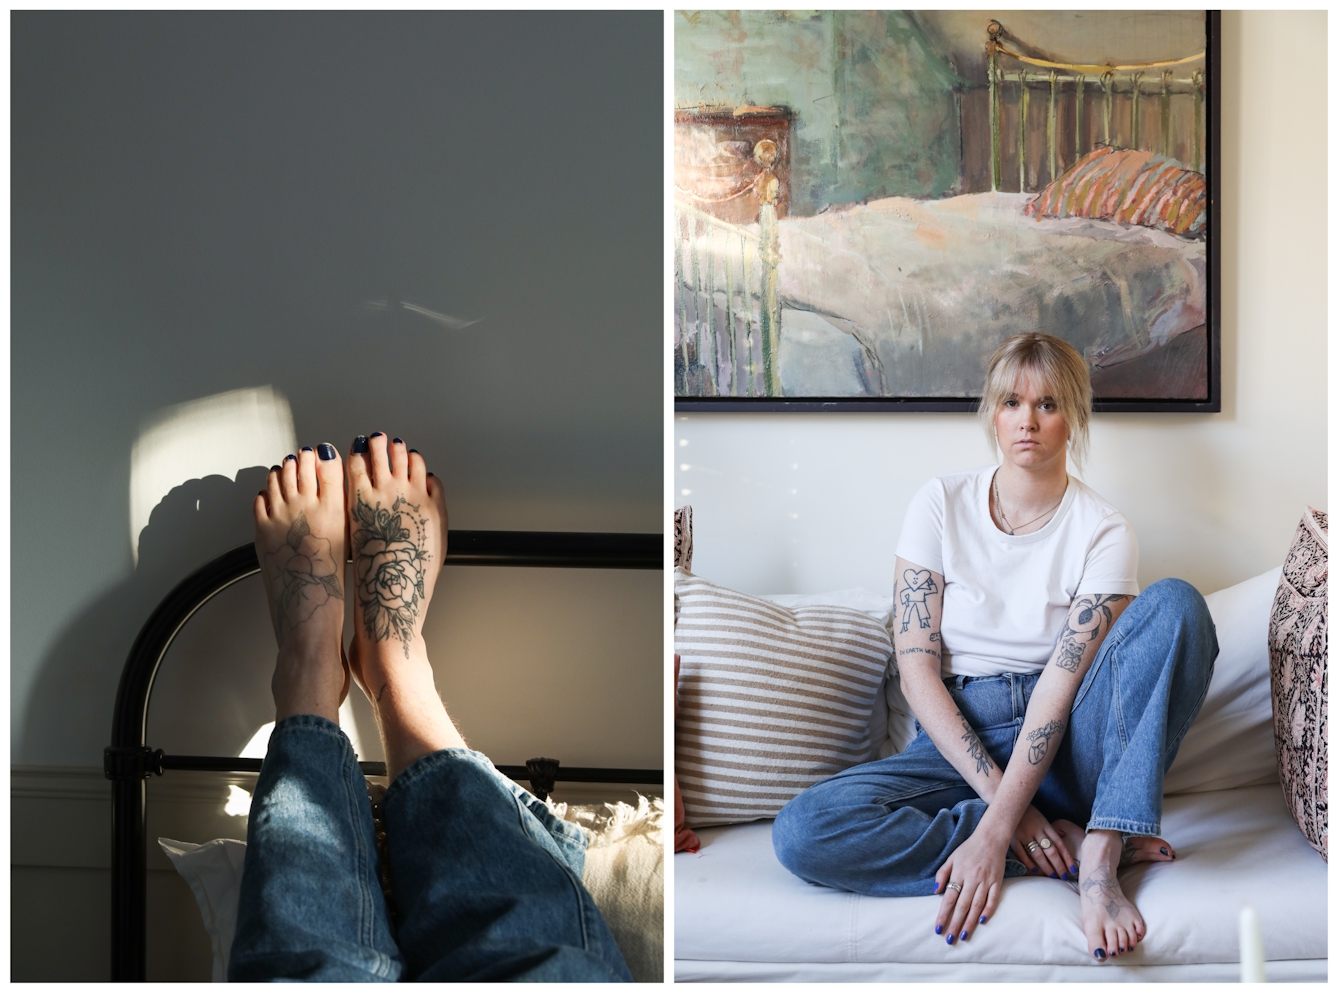 Photographic diptych. The image on the left show a woman's bare feet resting side by side against the metal frame of a bed. On the tops of both feet are floral tattoos and her toenails have been painted black. She is wearing blue jeans, visible from the knee down. A shaft of sunlight travels from right to left, bathing her feet in light. The image on the right shows the same young woman, but this time she is sat on a sofa, legs bent, resting on the sofa too. She is looking straight to camera with a direct and engaging expression. Behind her is a large painting of a  bedroom scene including a metal framed bed. Her arms and feet show several tattoos.